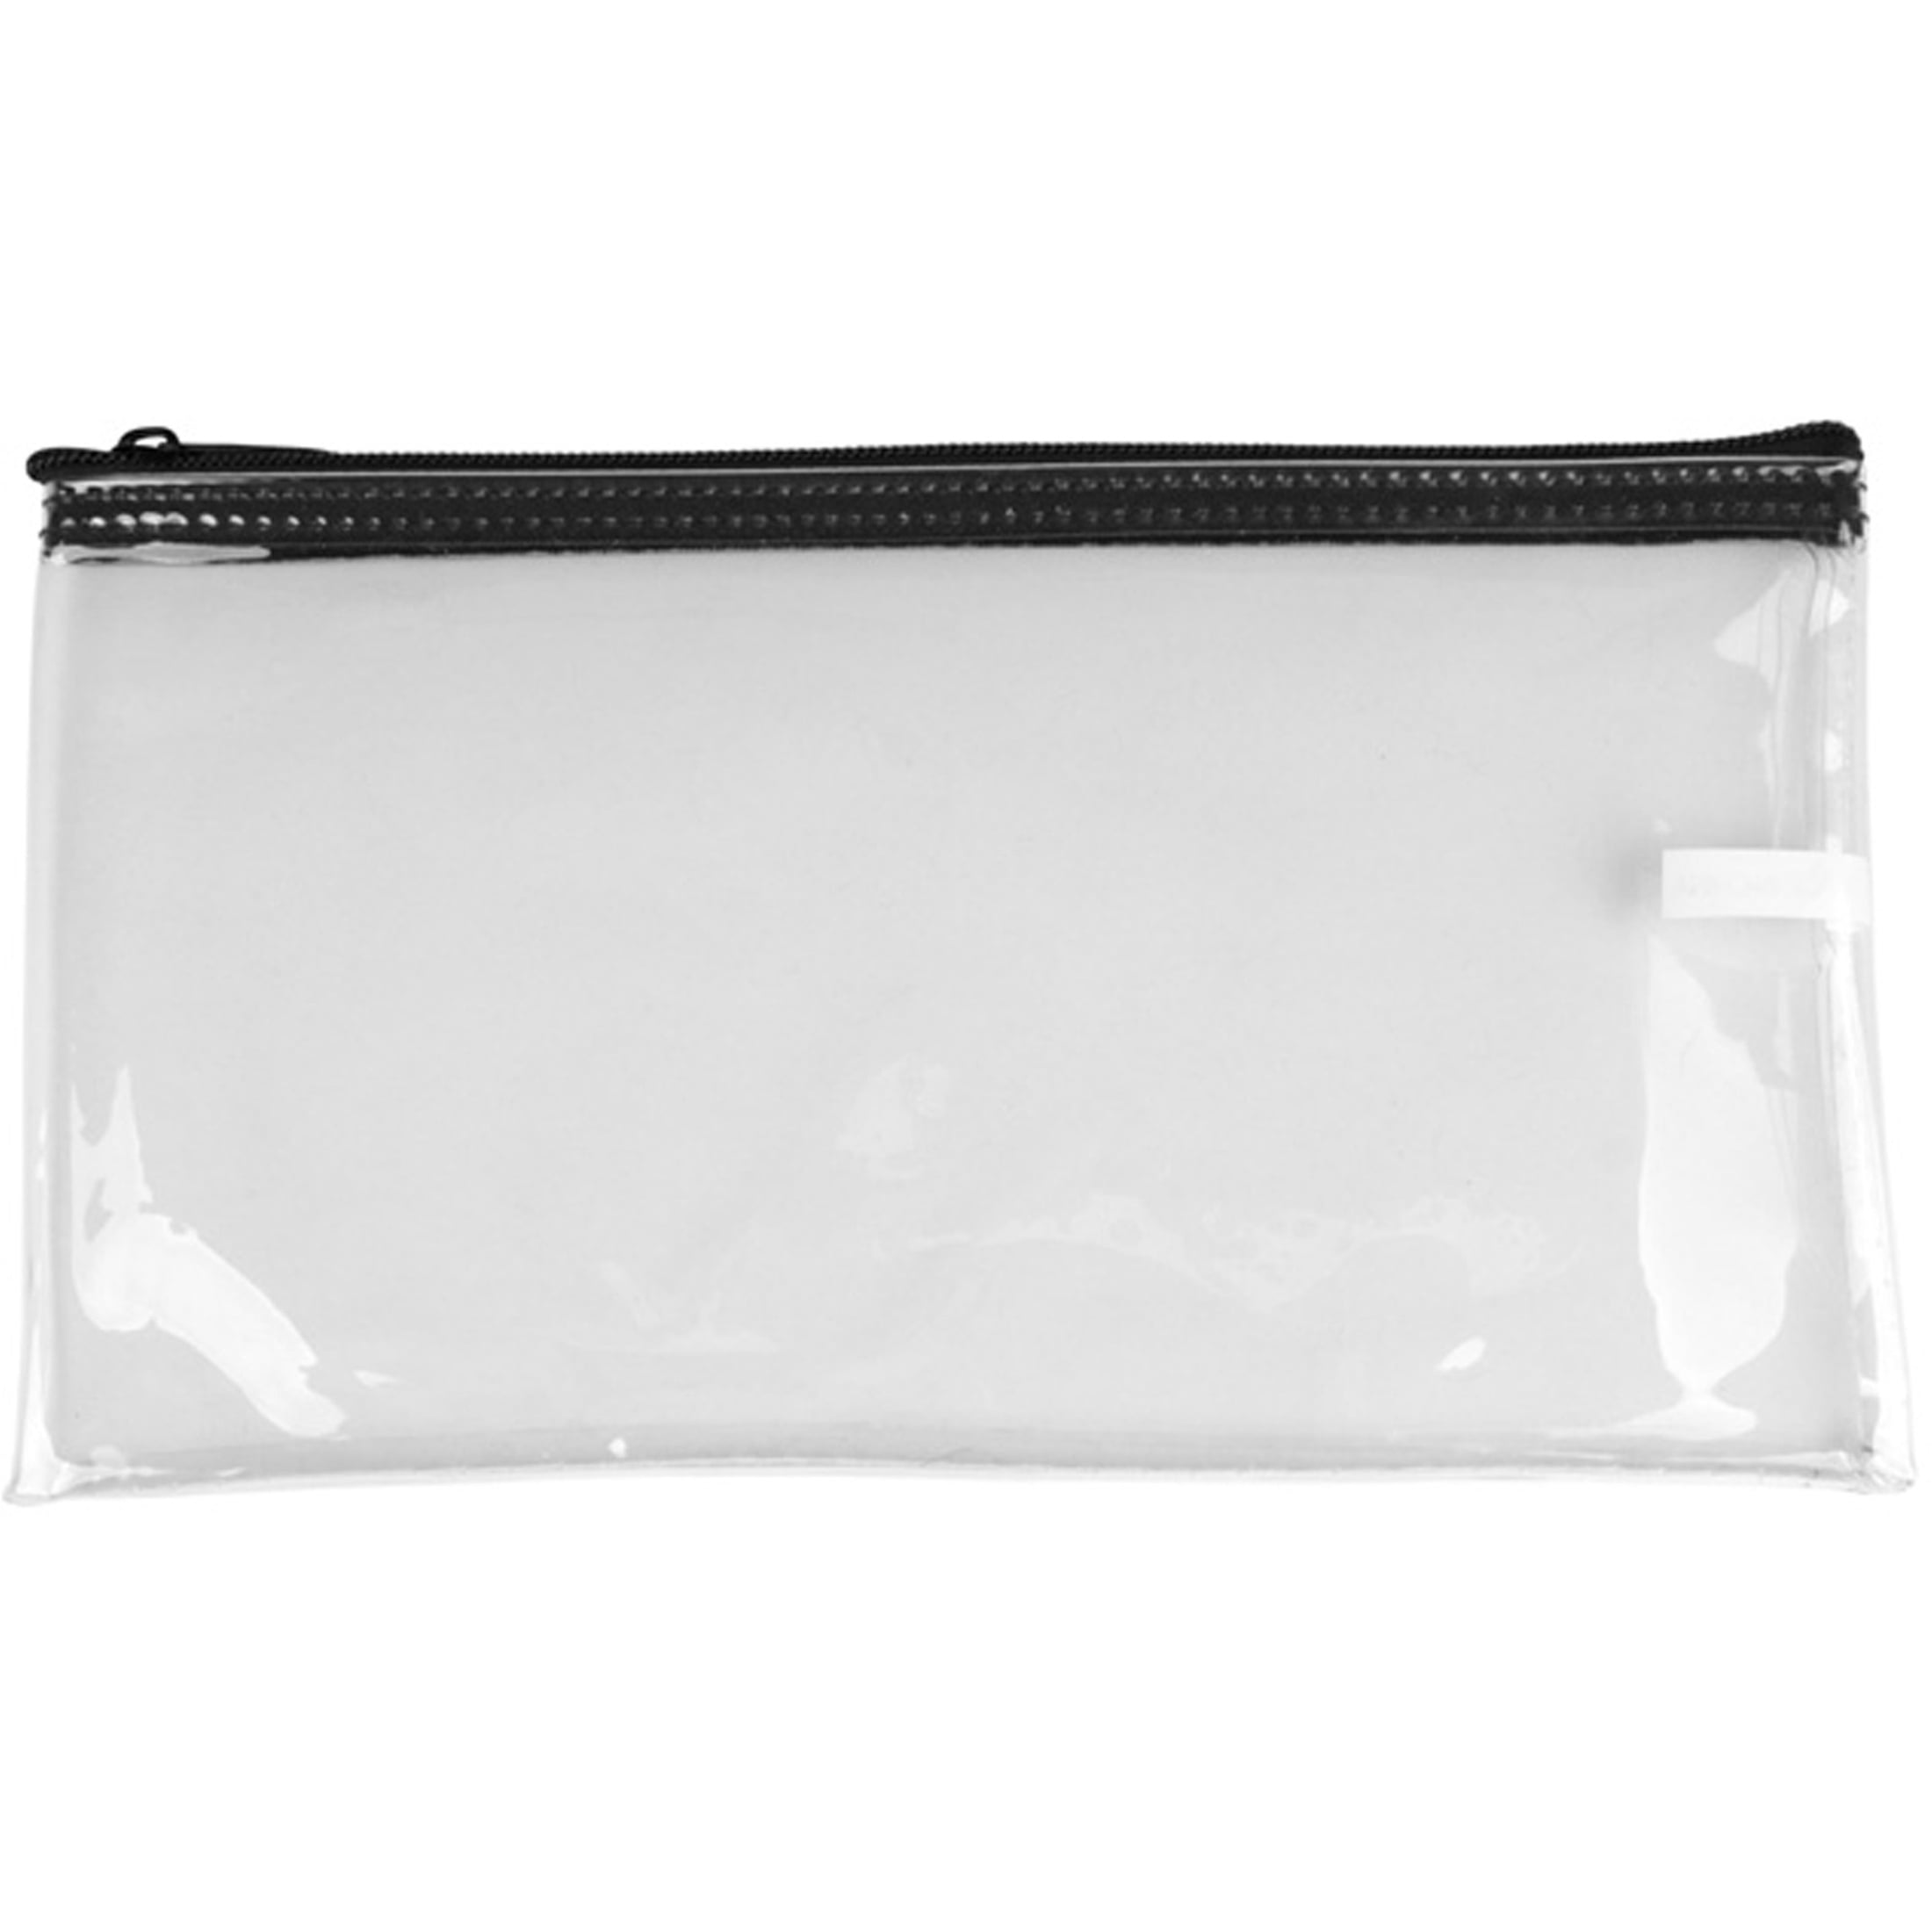 Cardinal bag supplies Vinyl Zipper Bags Leatherette 11 x 6 inches Small  Compact Black 1 Zippered Pouch CW